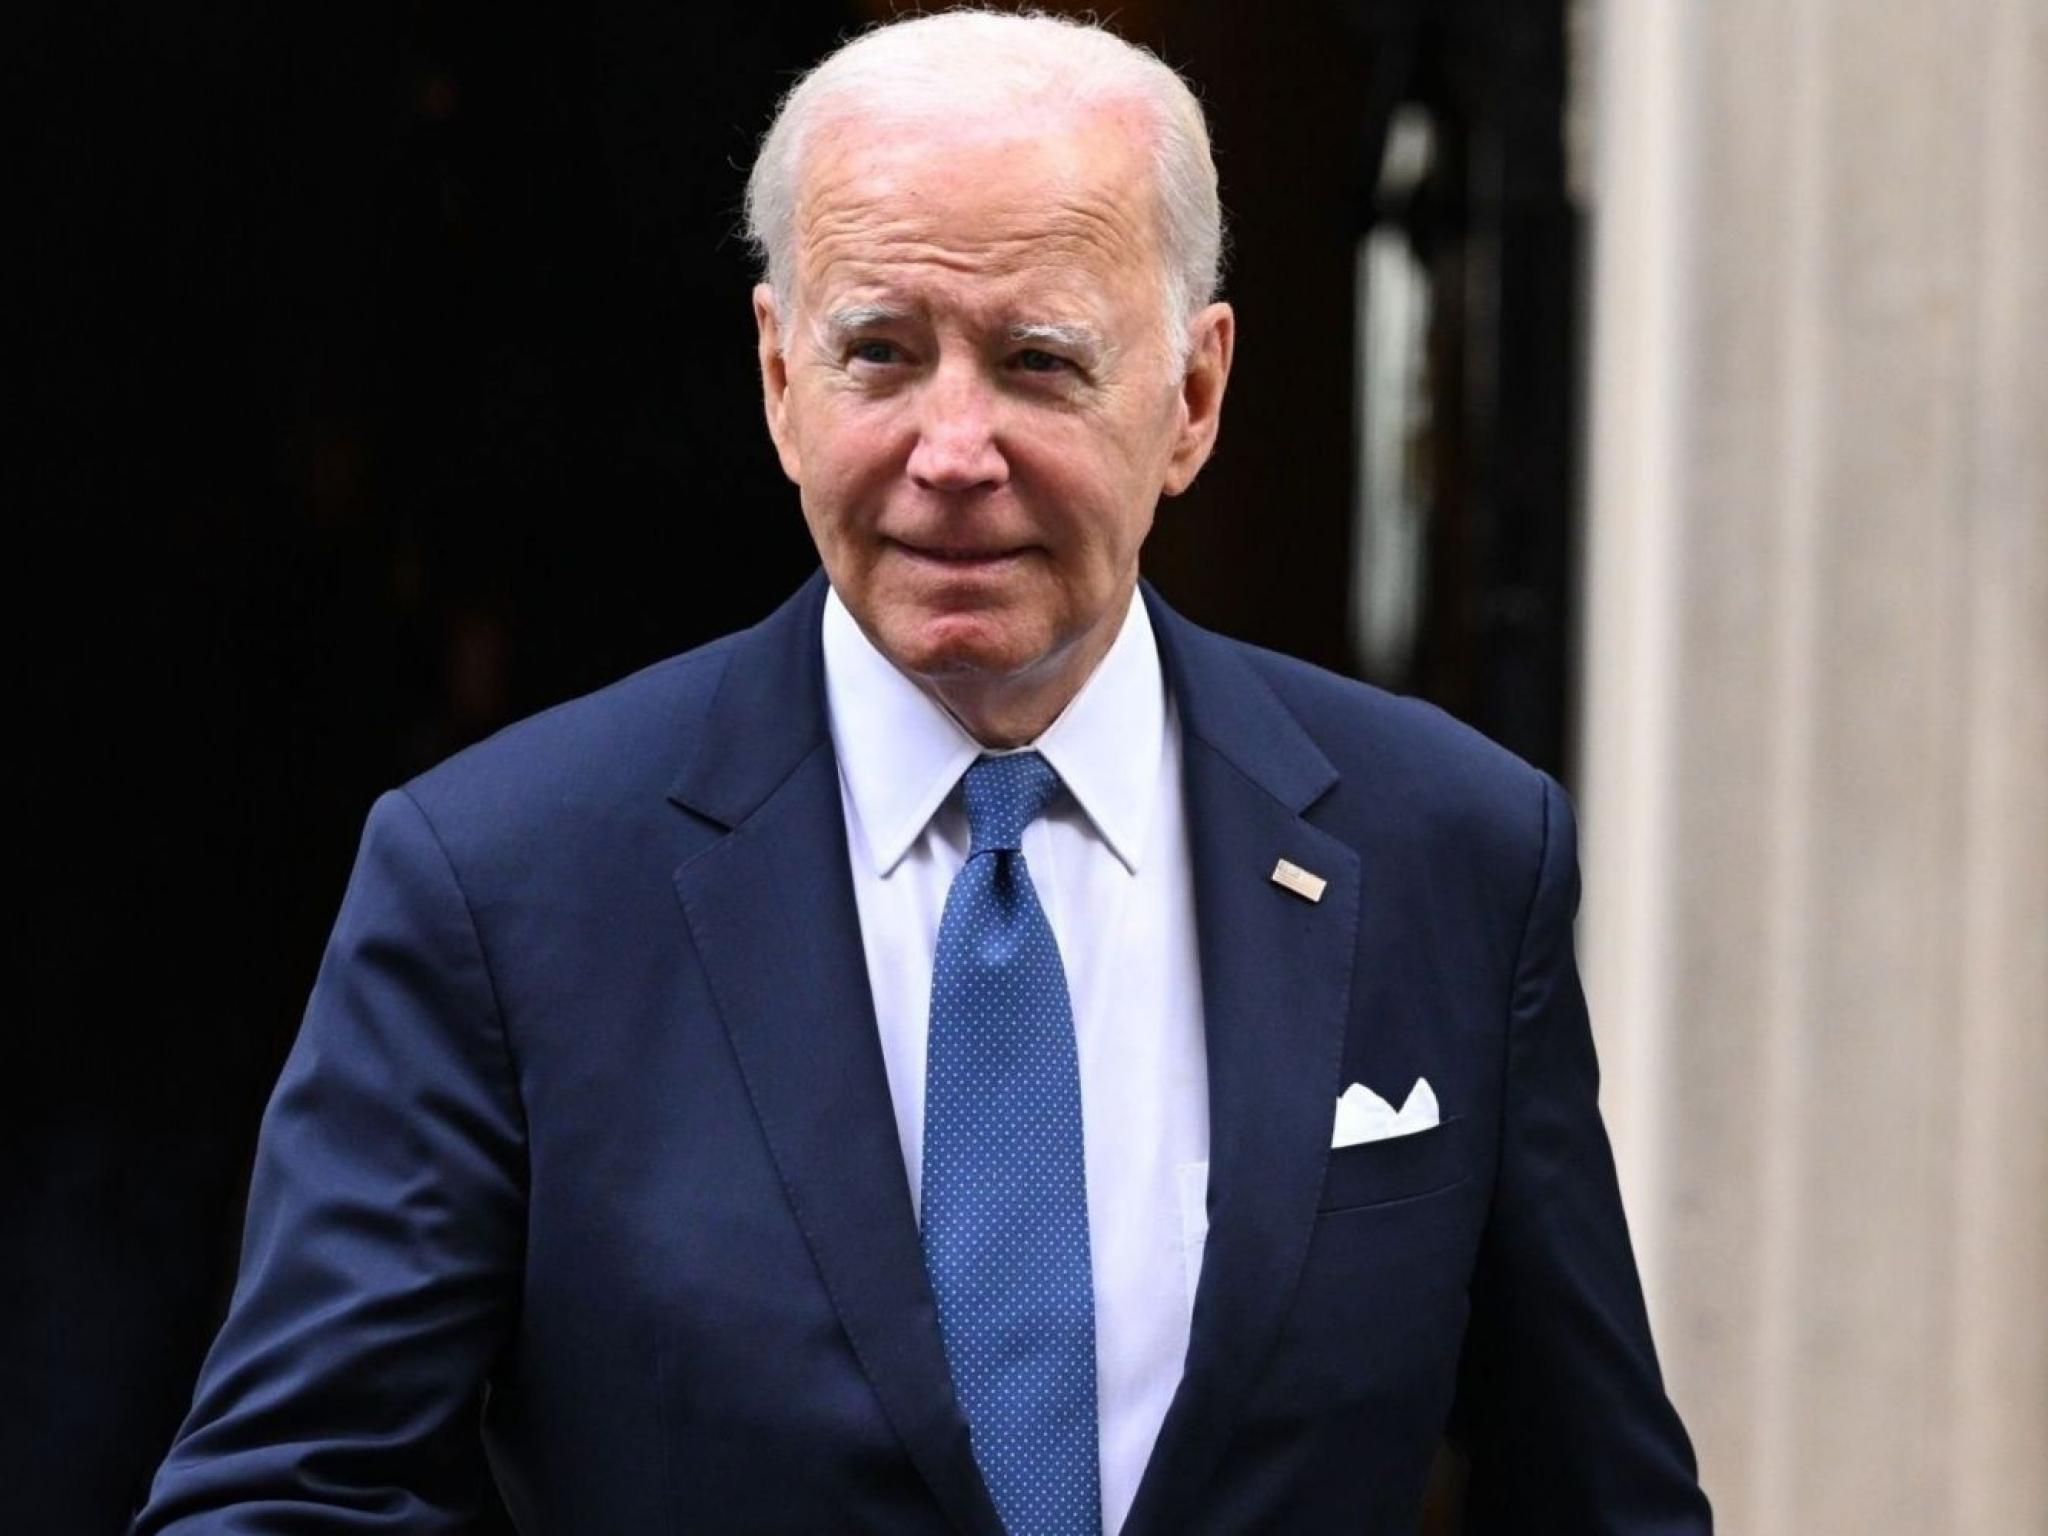  bill-ackman-doesnt-see-an-ideal-president-for-2024-yet-biden-should-step-aside-for-alternative-candidates 